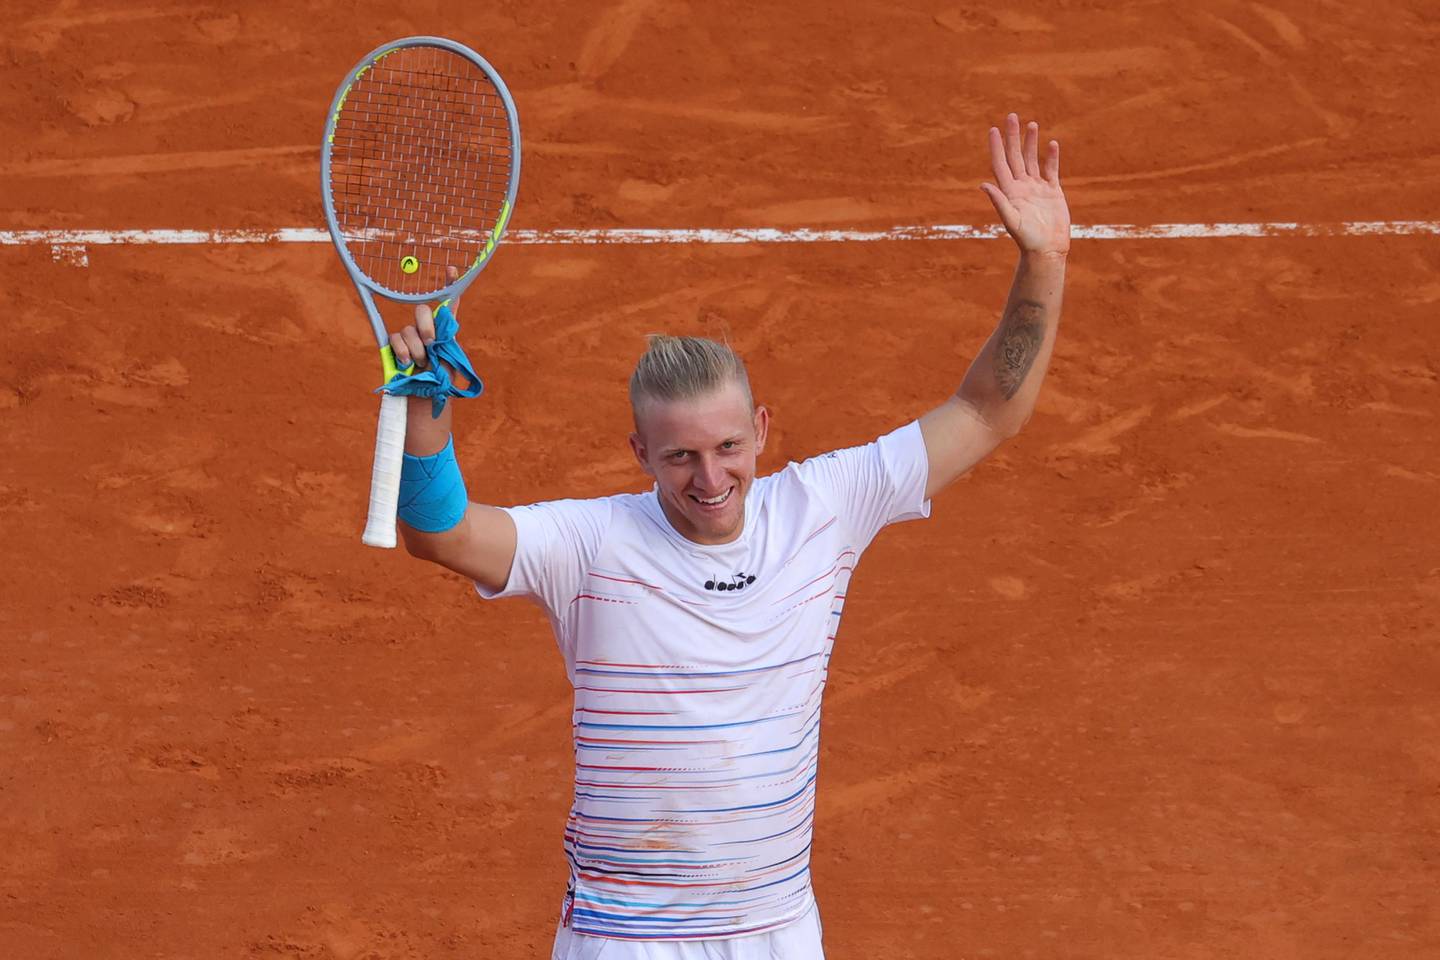 Alejandro Davidovich Fokina celebrates after beating Djokovic for the best win of his career. AFP